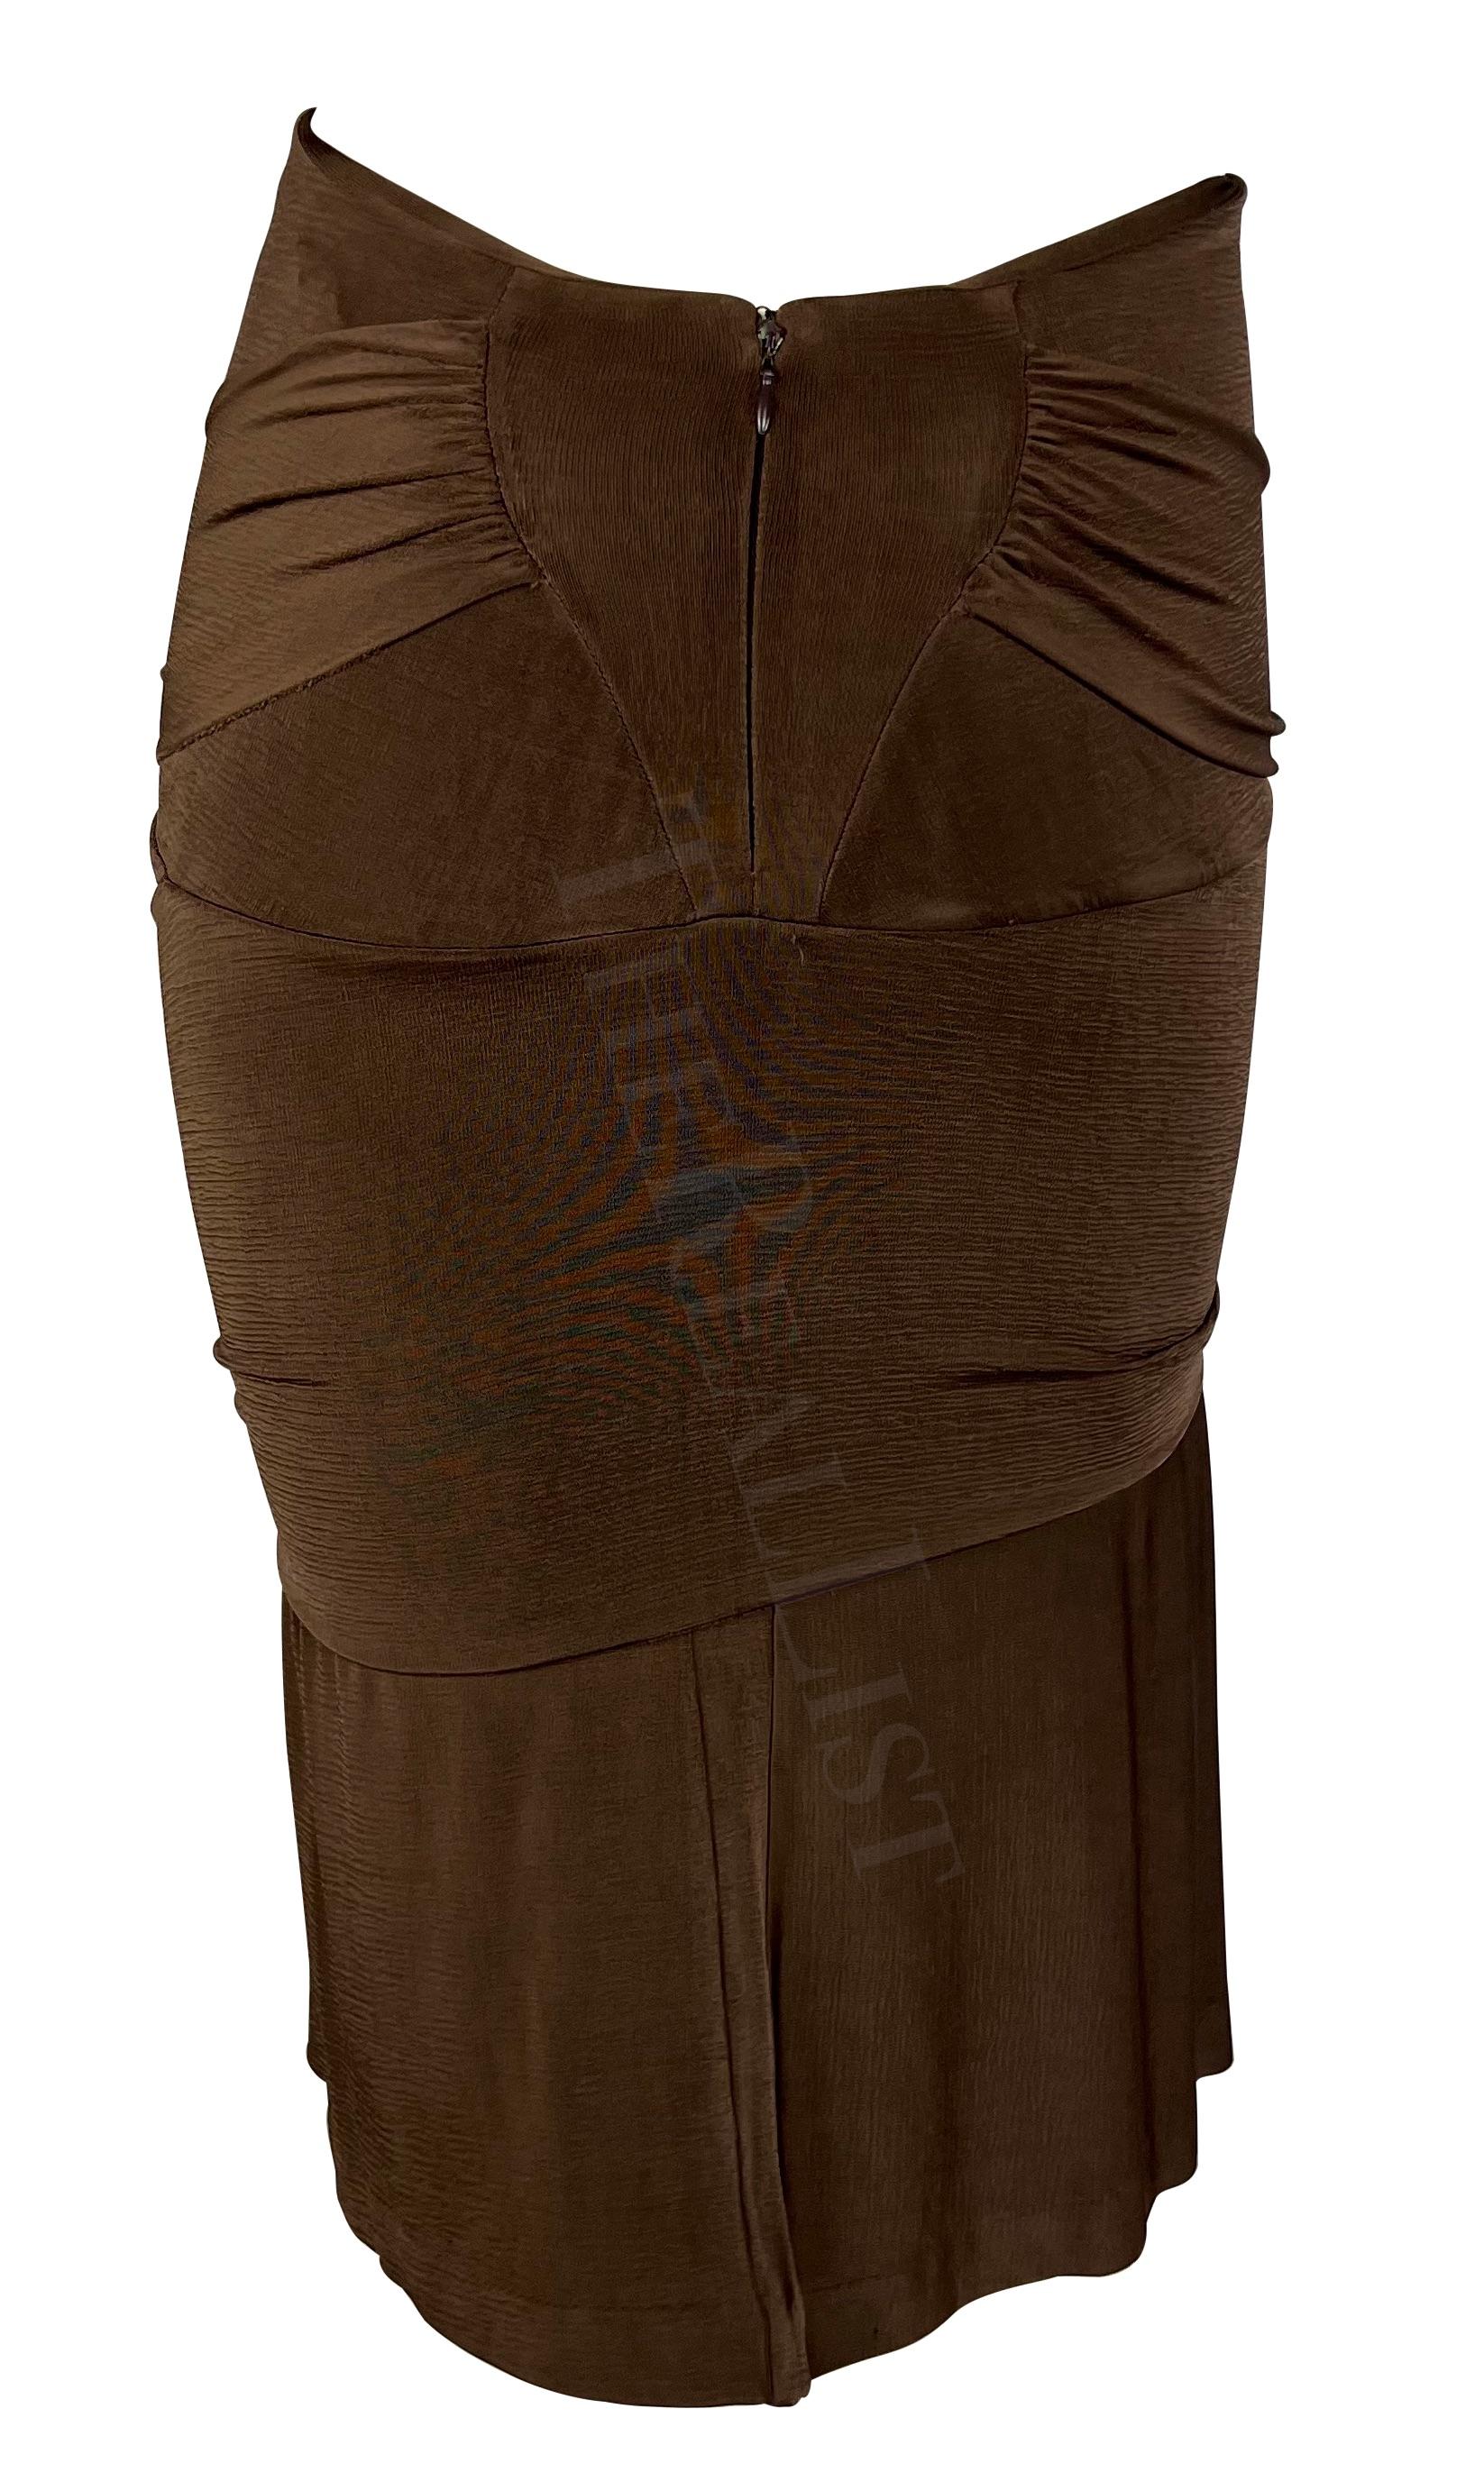 S/S 2003 Yves Saint Laurent by Tom Ford Runway Brown Ruched Slinky Skirt For Sale 4